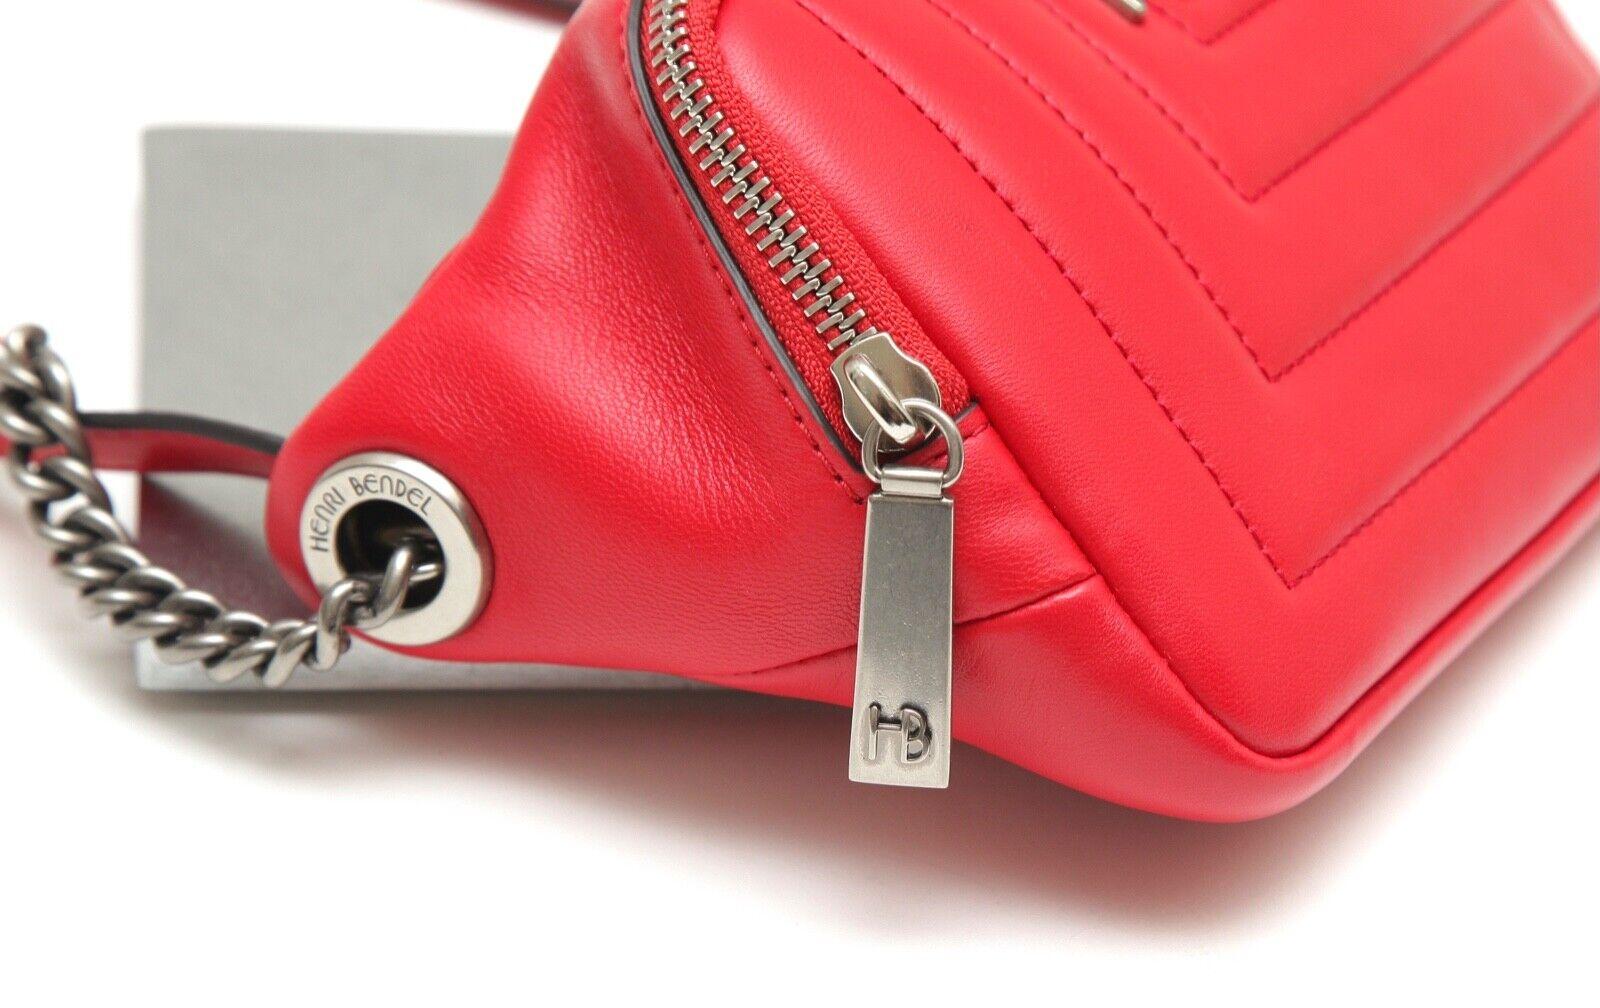 
GUARANTEED AUTHENTIC HENRI BENDEL RED LEATHER BELT BAG

- Classic belt bag in a quilted red leather.
- Gunmetal hardware.
- Adjustable belt.
- One main interior interior compartment with credit card slots and slip pocket.
- Comes with dust